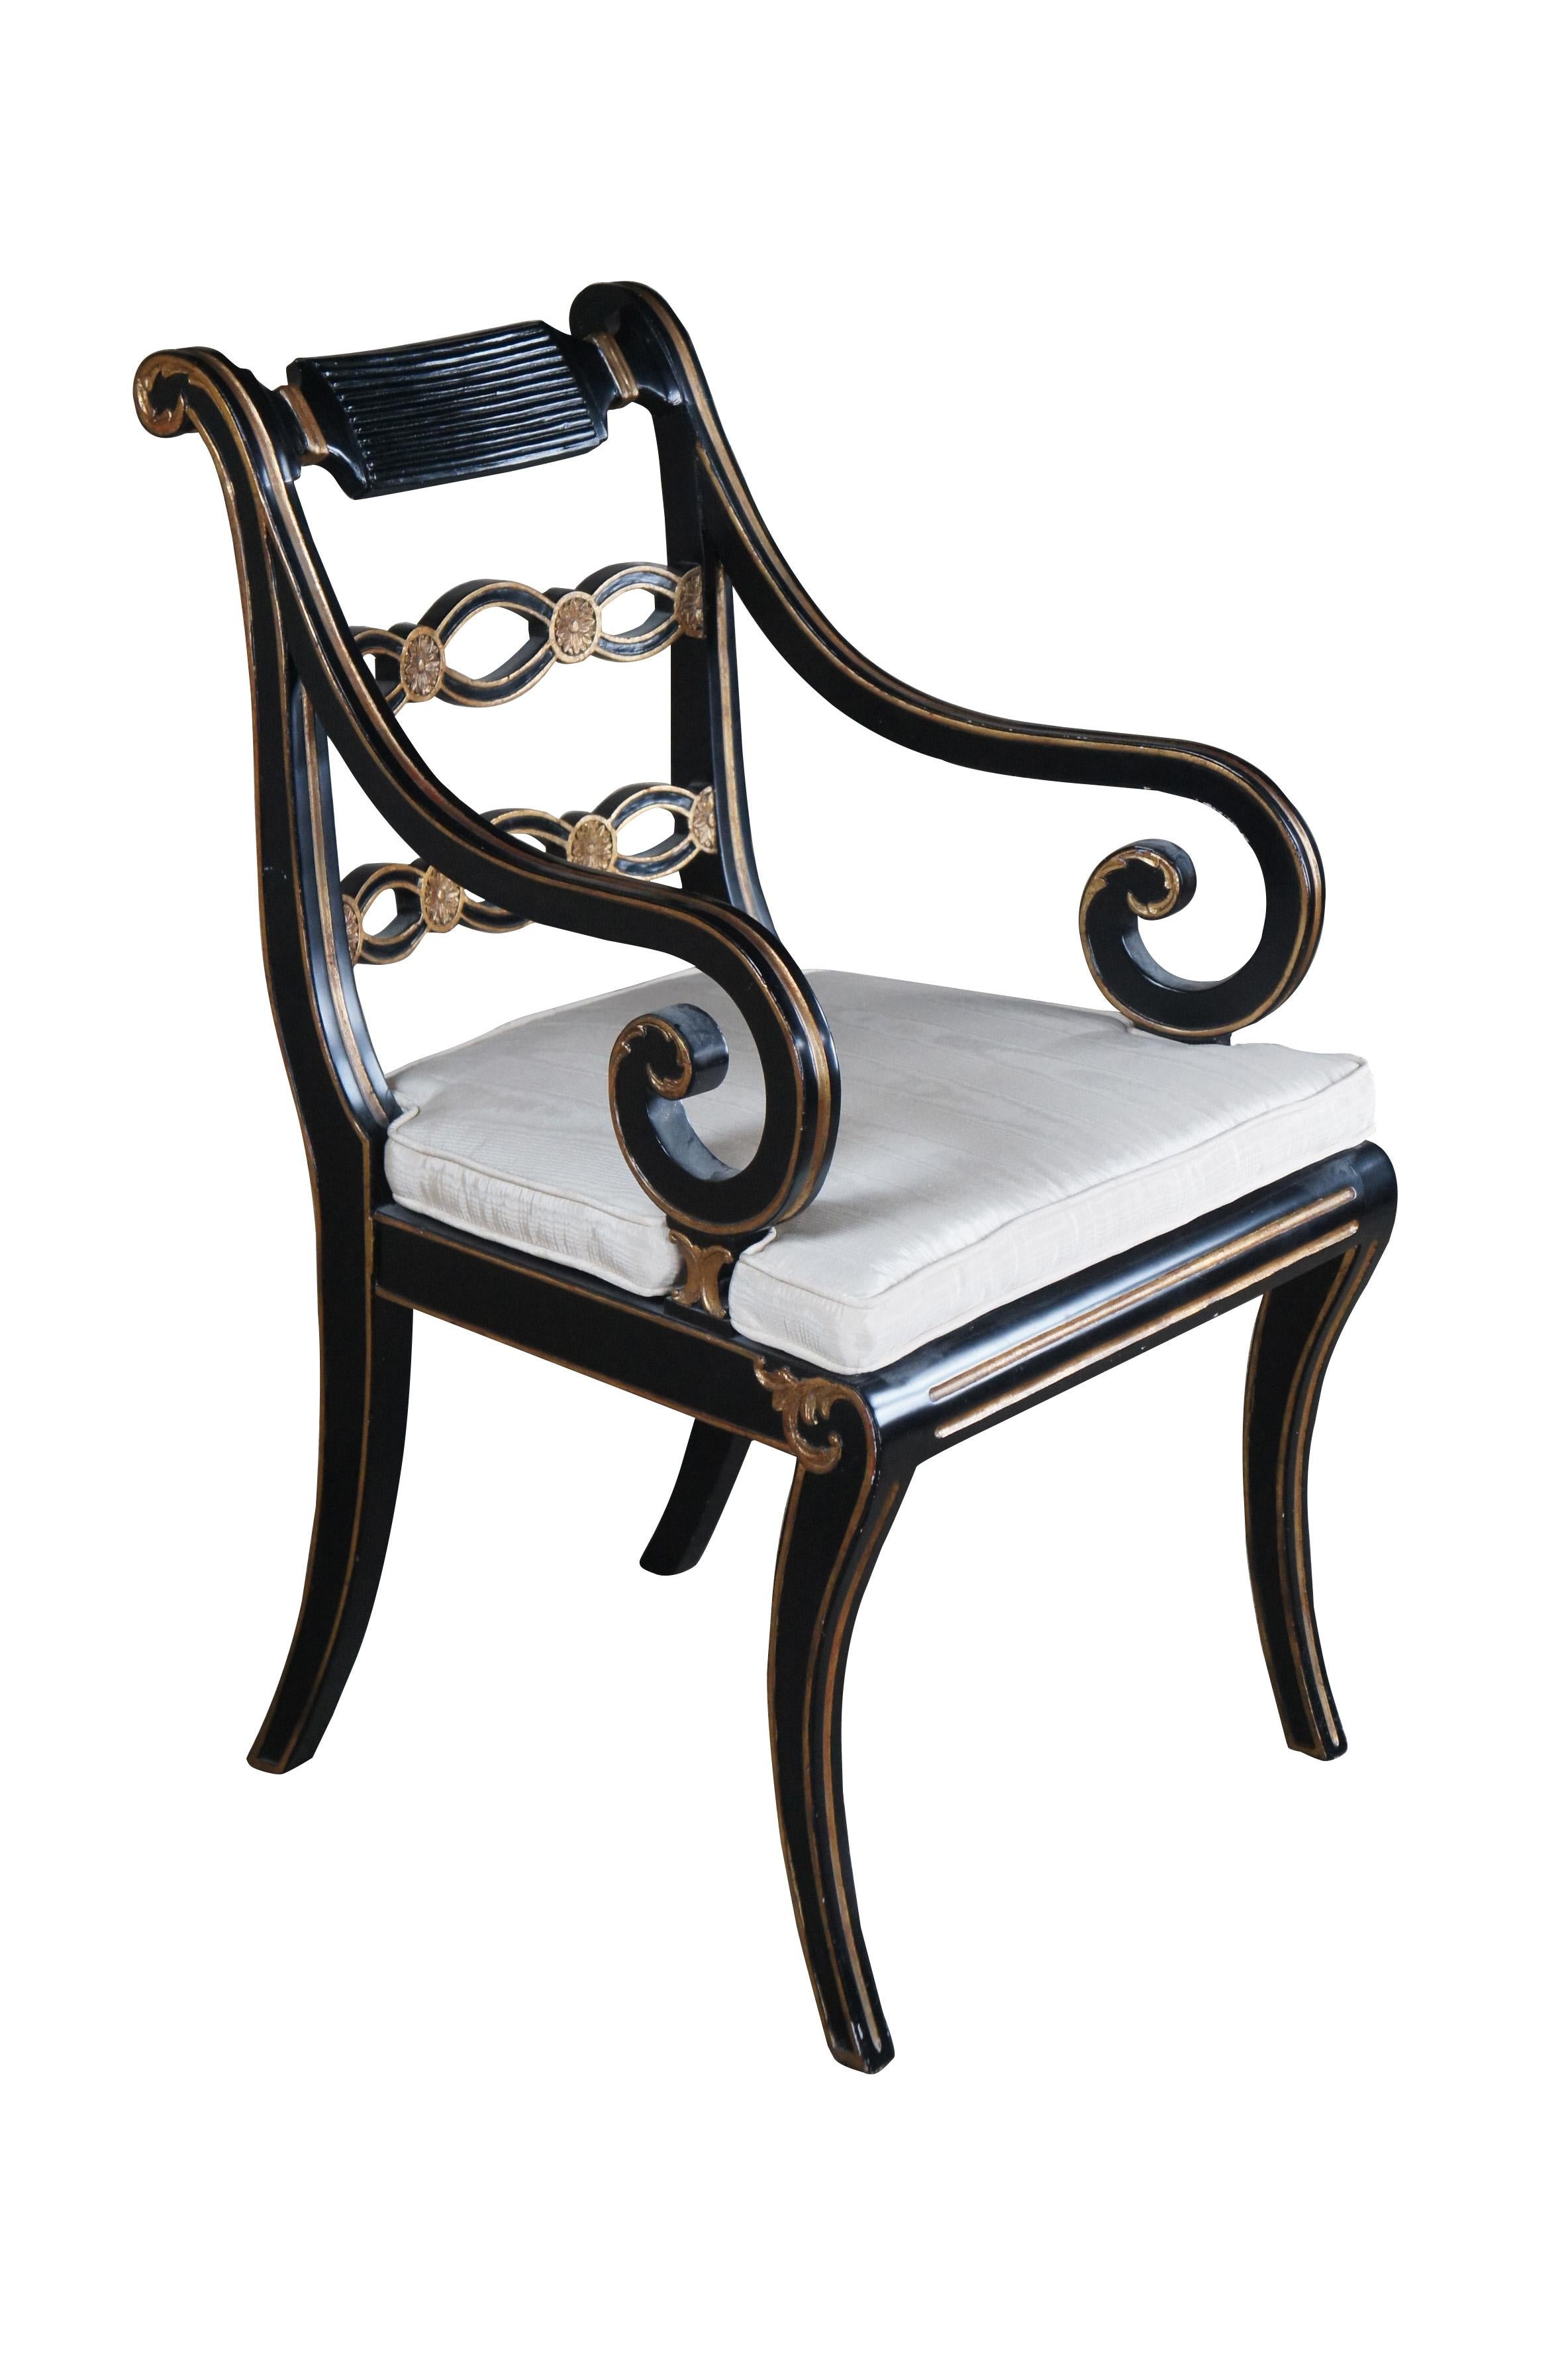 Vintage English Regency style pierced Riddle back armchair featuring ebonized black painted frame with gold accents, caned seat and scrolled arms.

Dimensions:
23.5